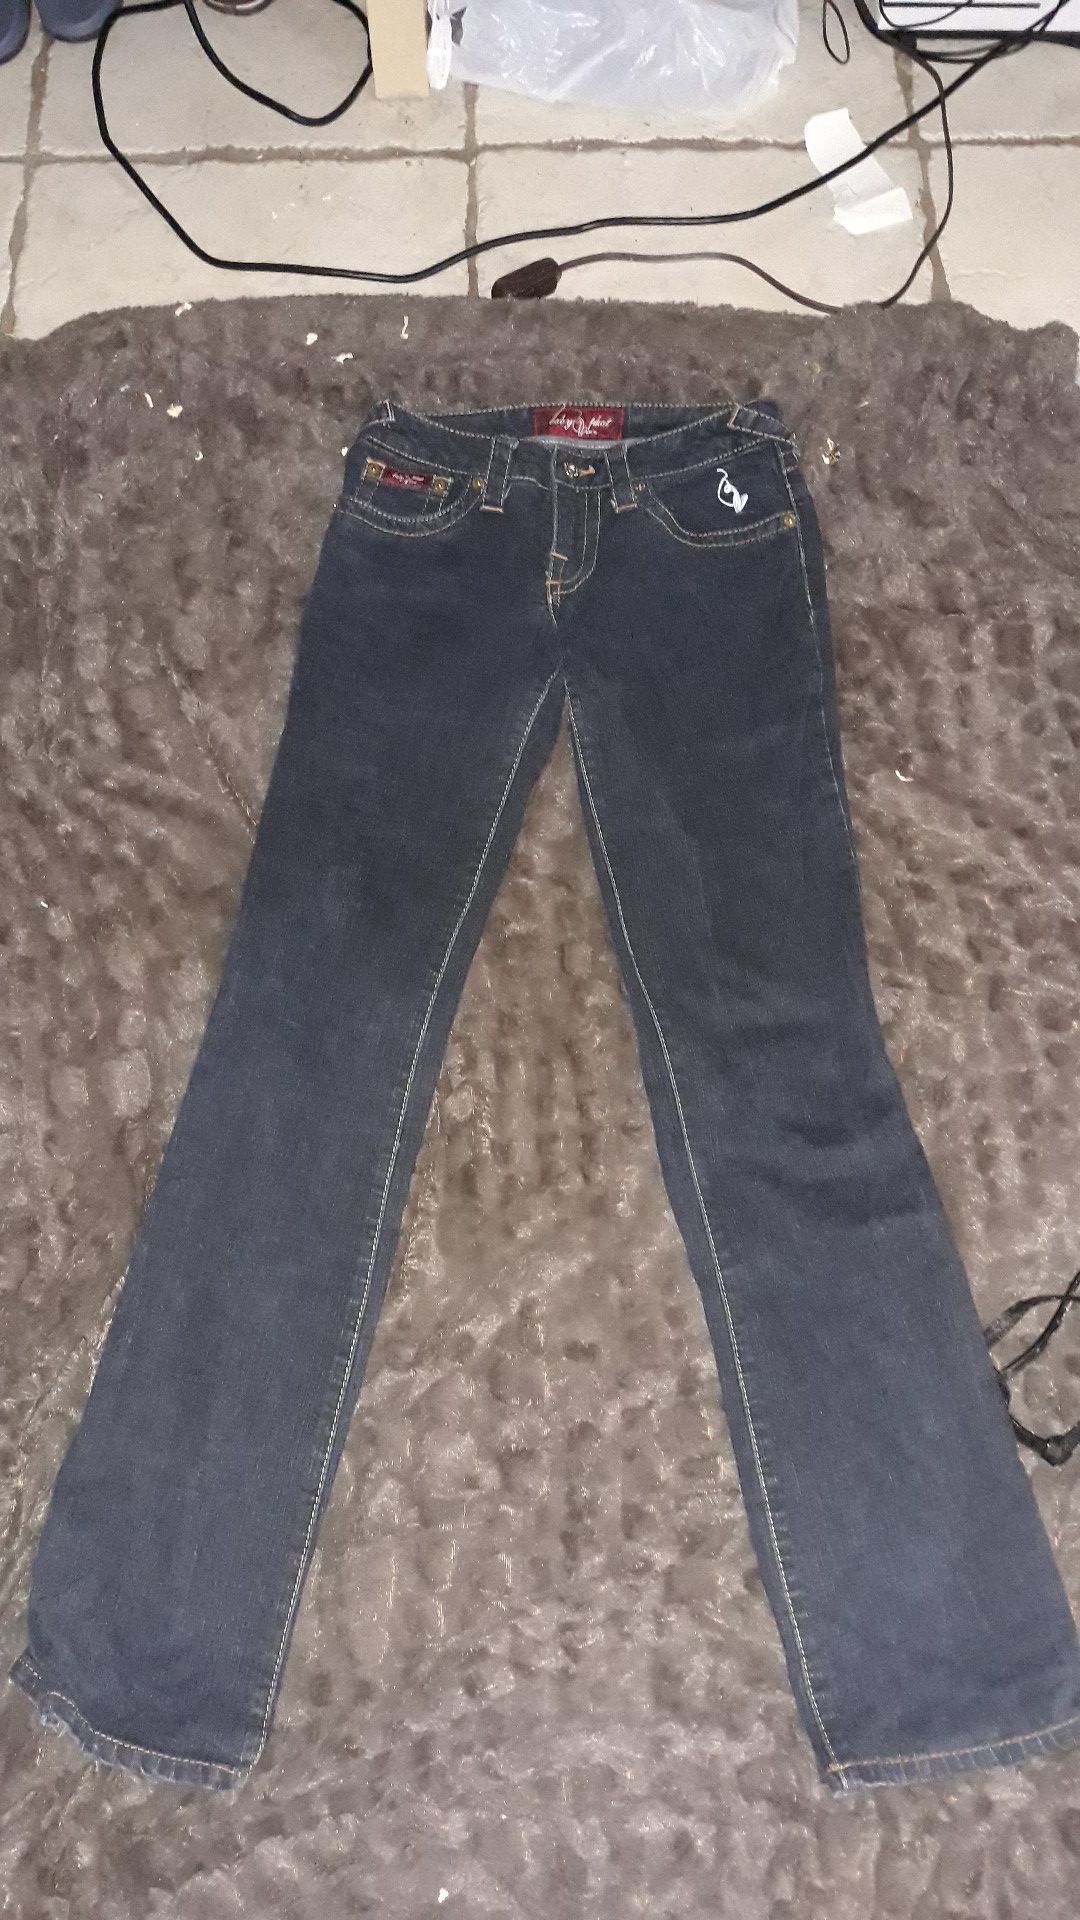 Baby phat size 1 jeans